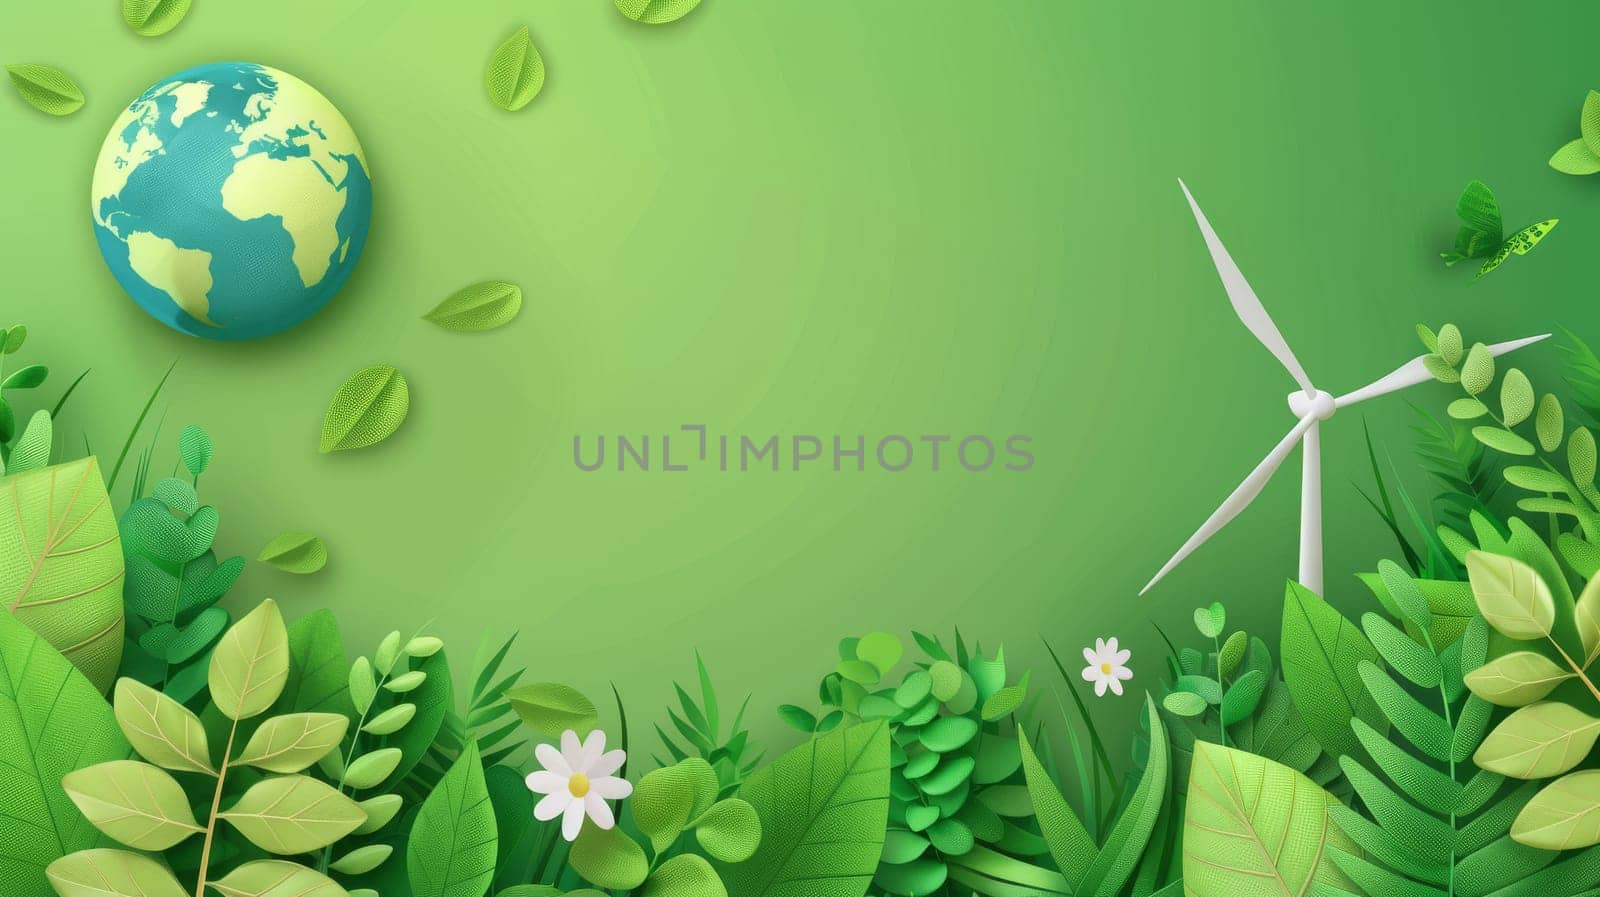 ECO-friendly illustration design for web, banner, campaign, social media and banners. Save the earth, globe, windmill, foliage on green background.